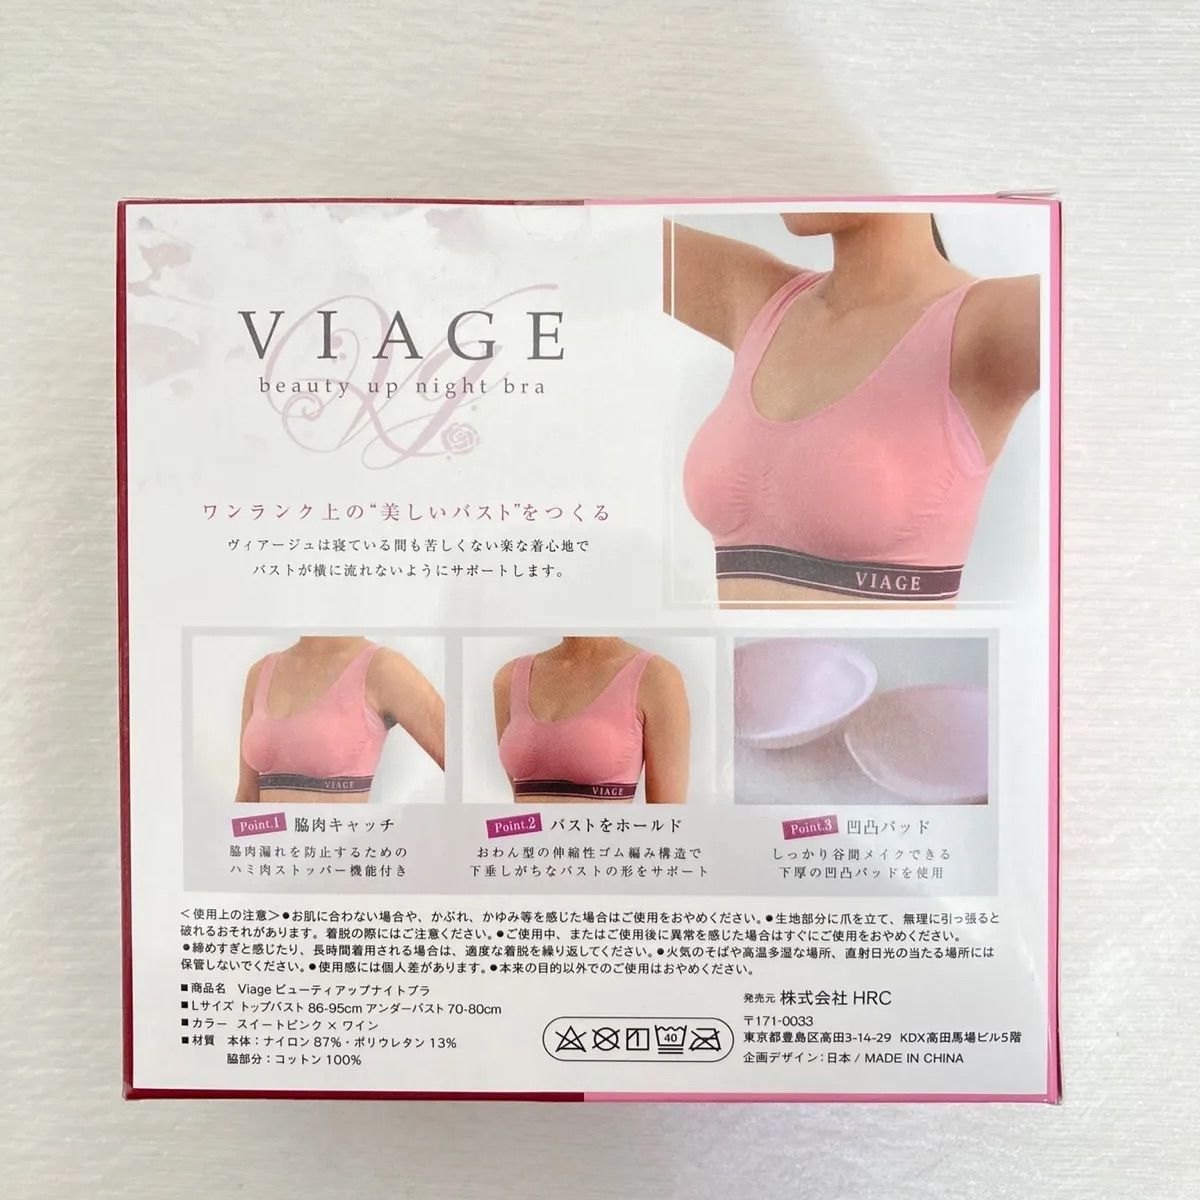 Viage ビューティアップナイトブラ 2箱セット - その他